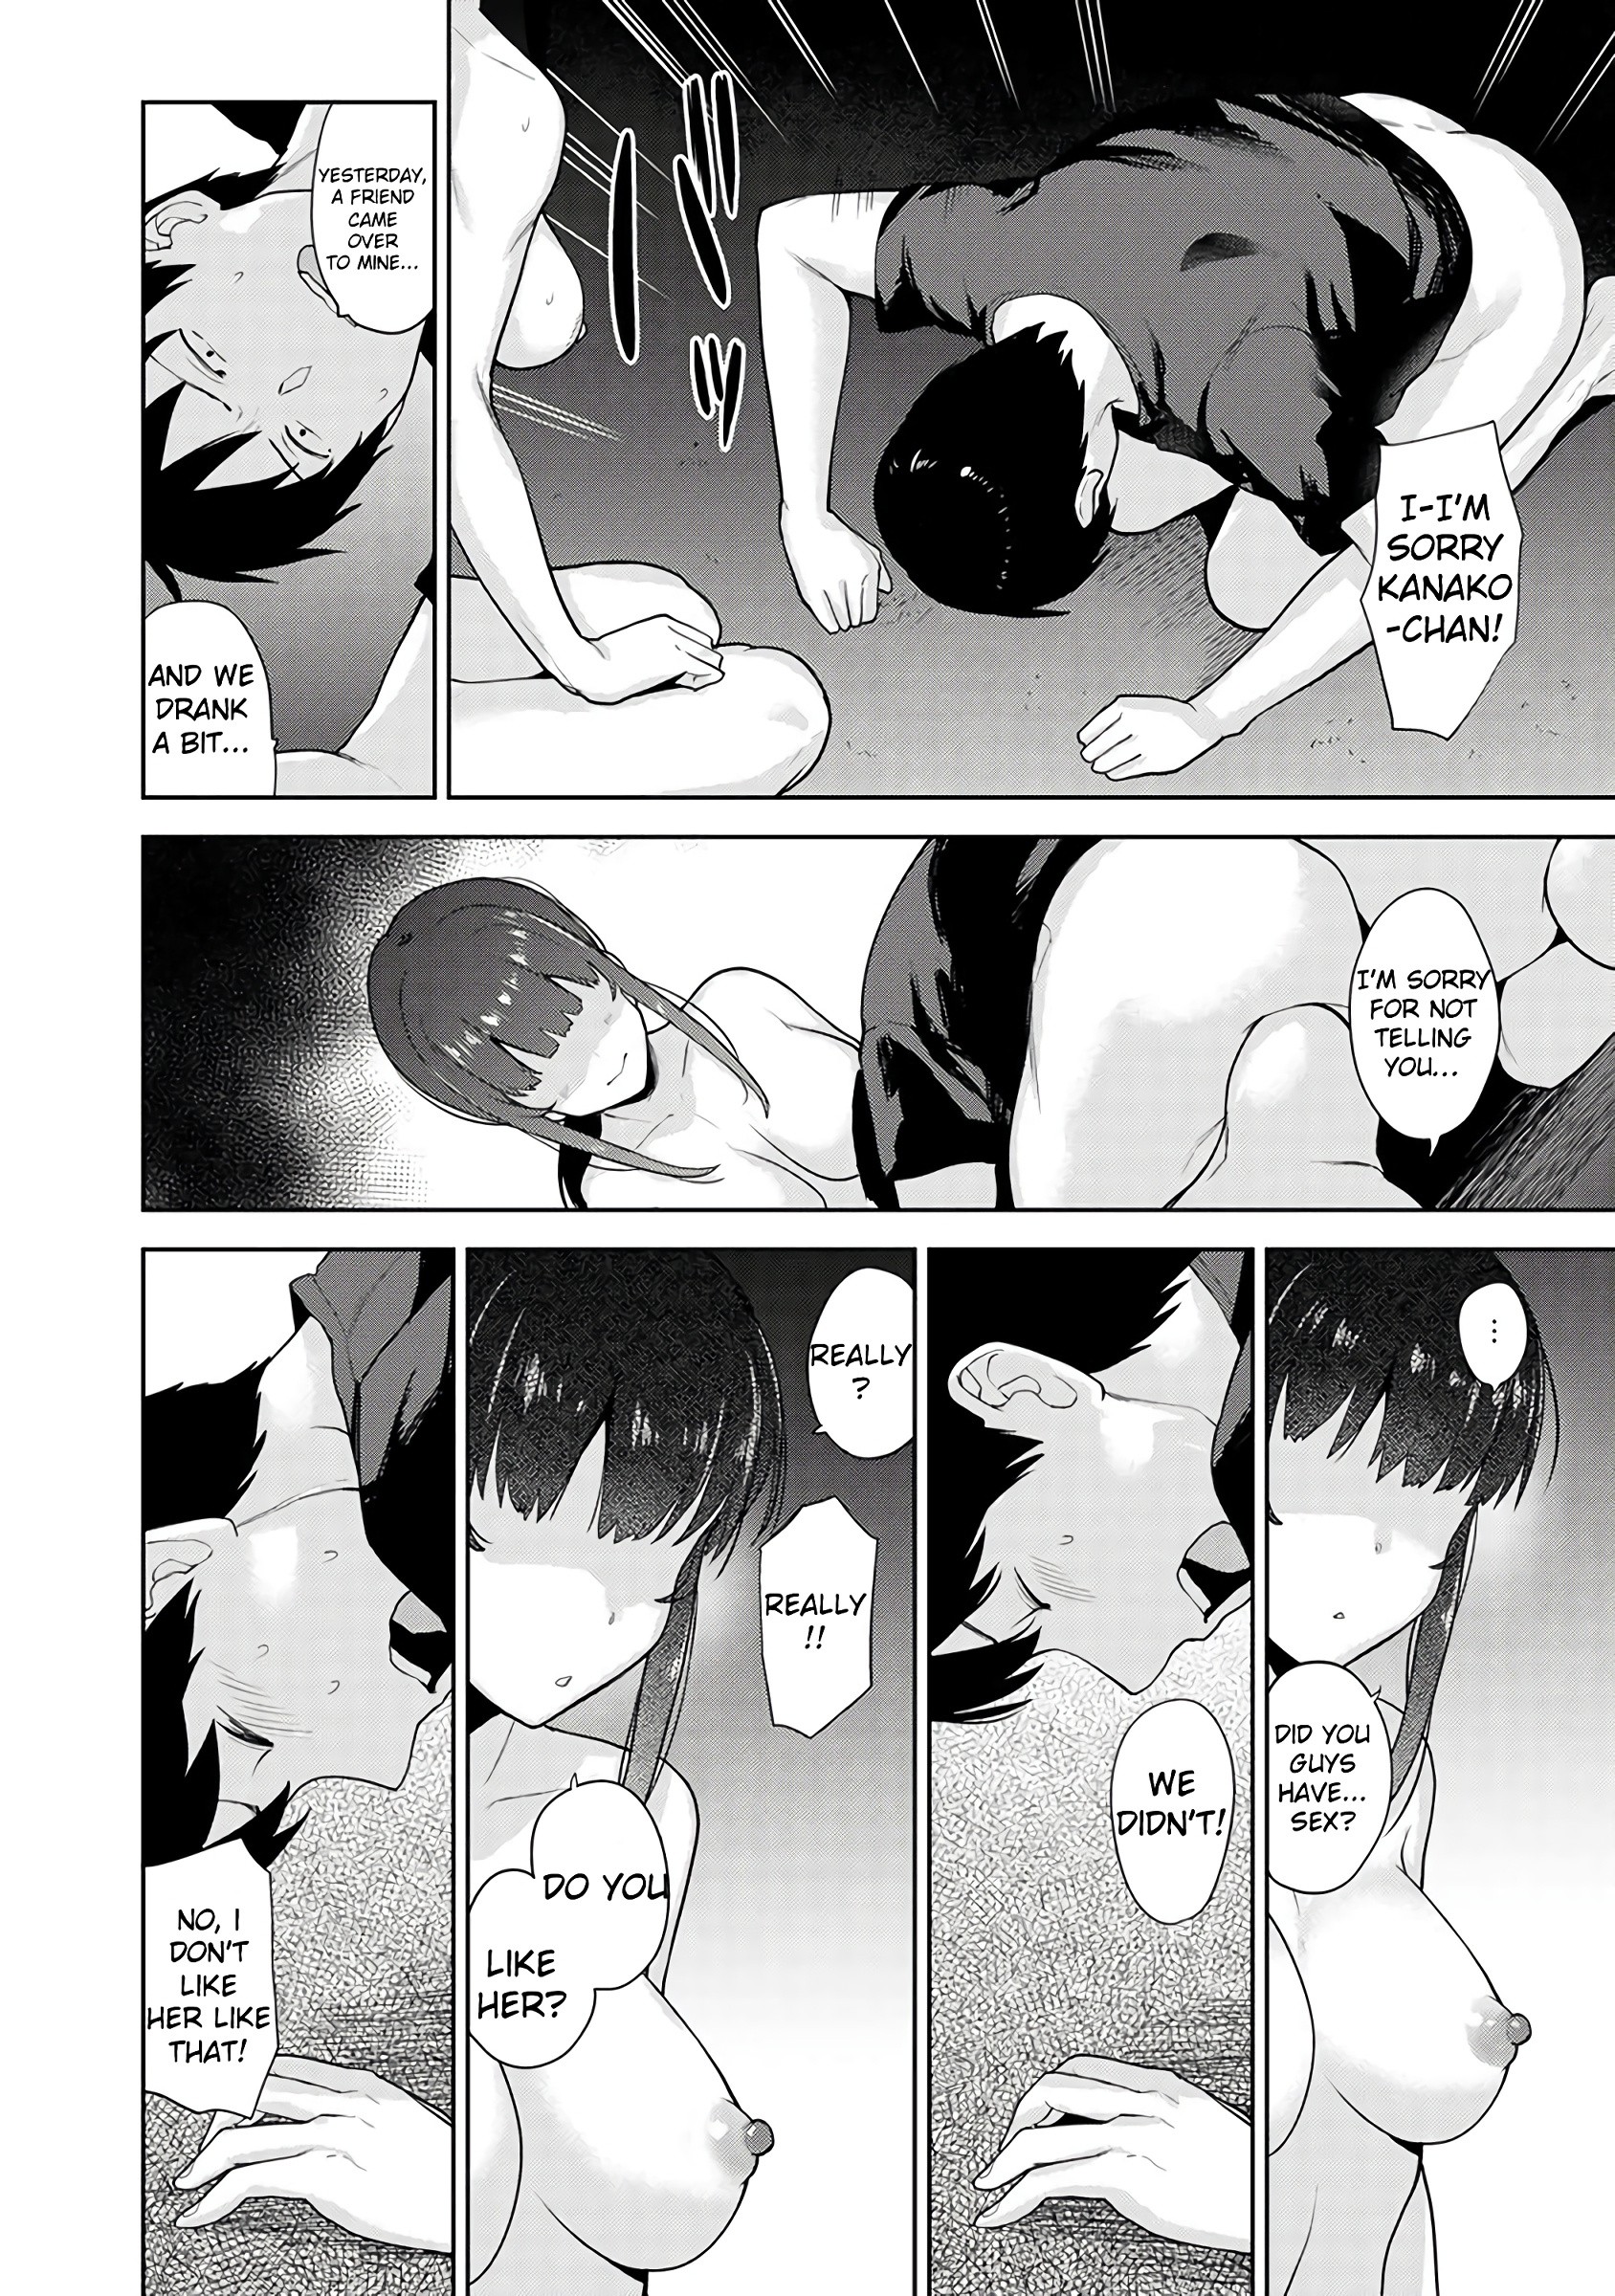 Method to Catch a Pretty Girl 9 hentai manga picture 2